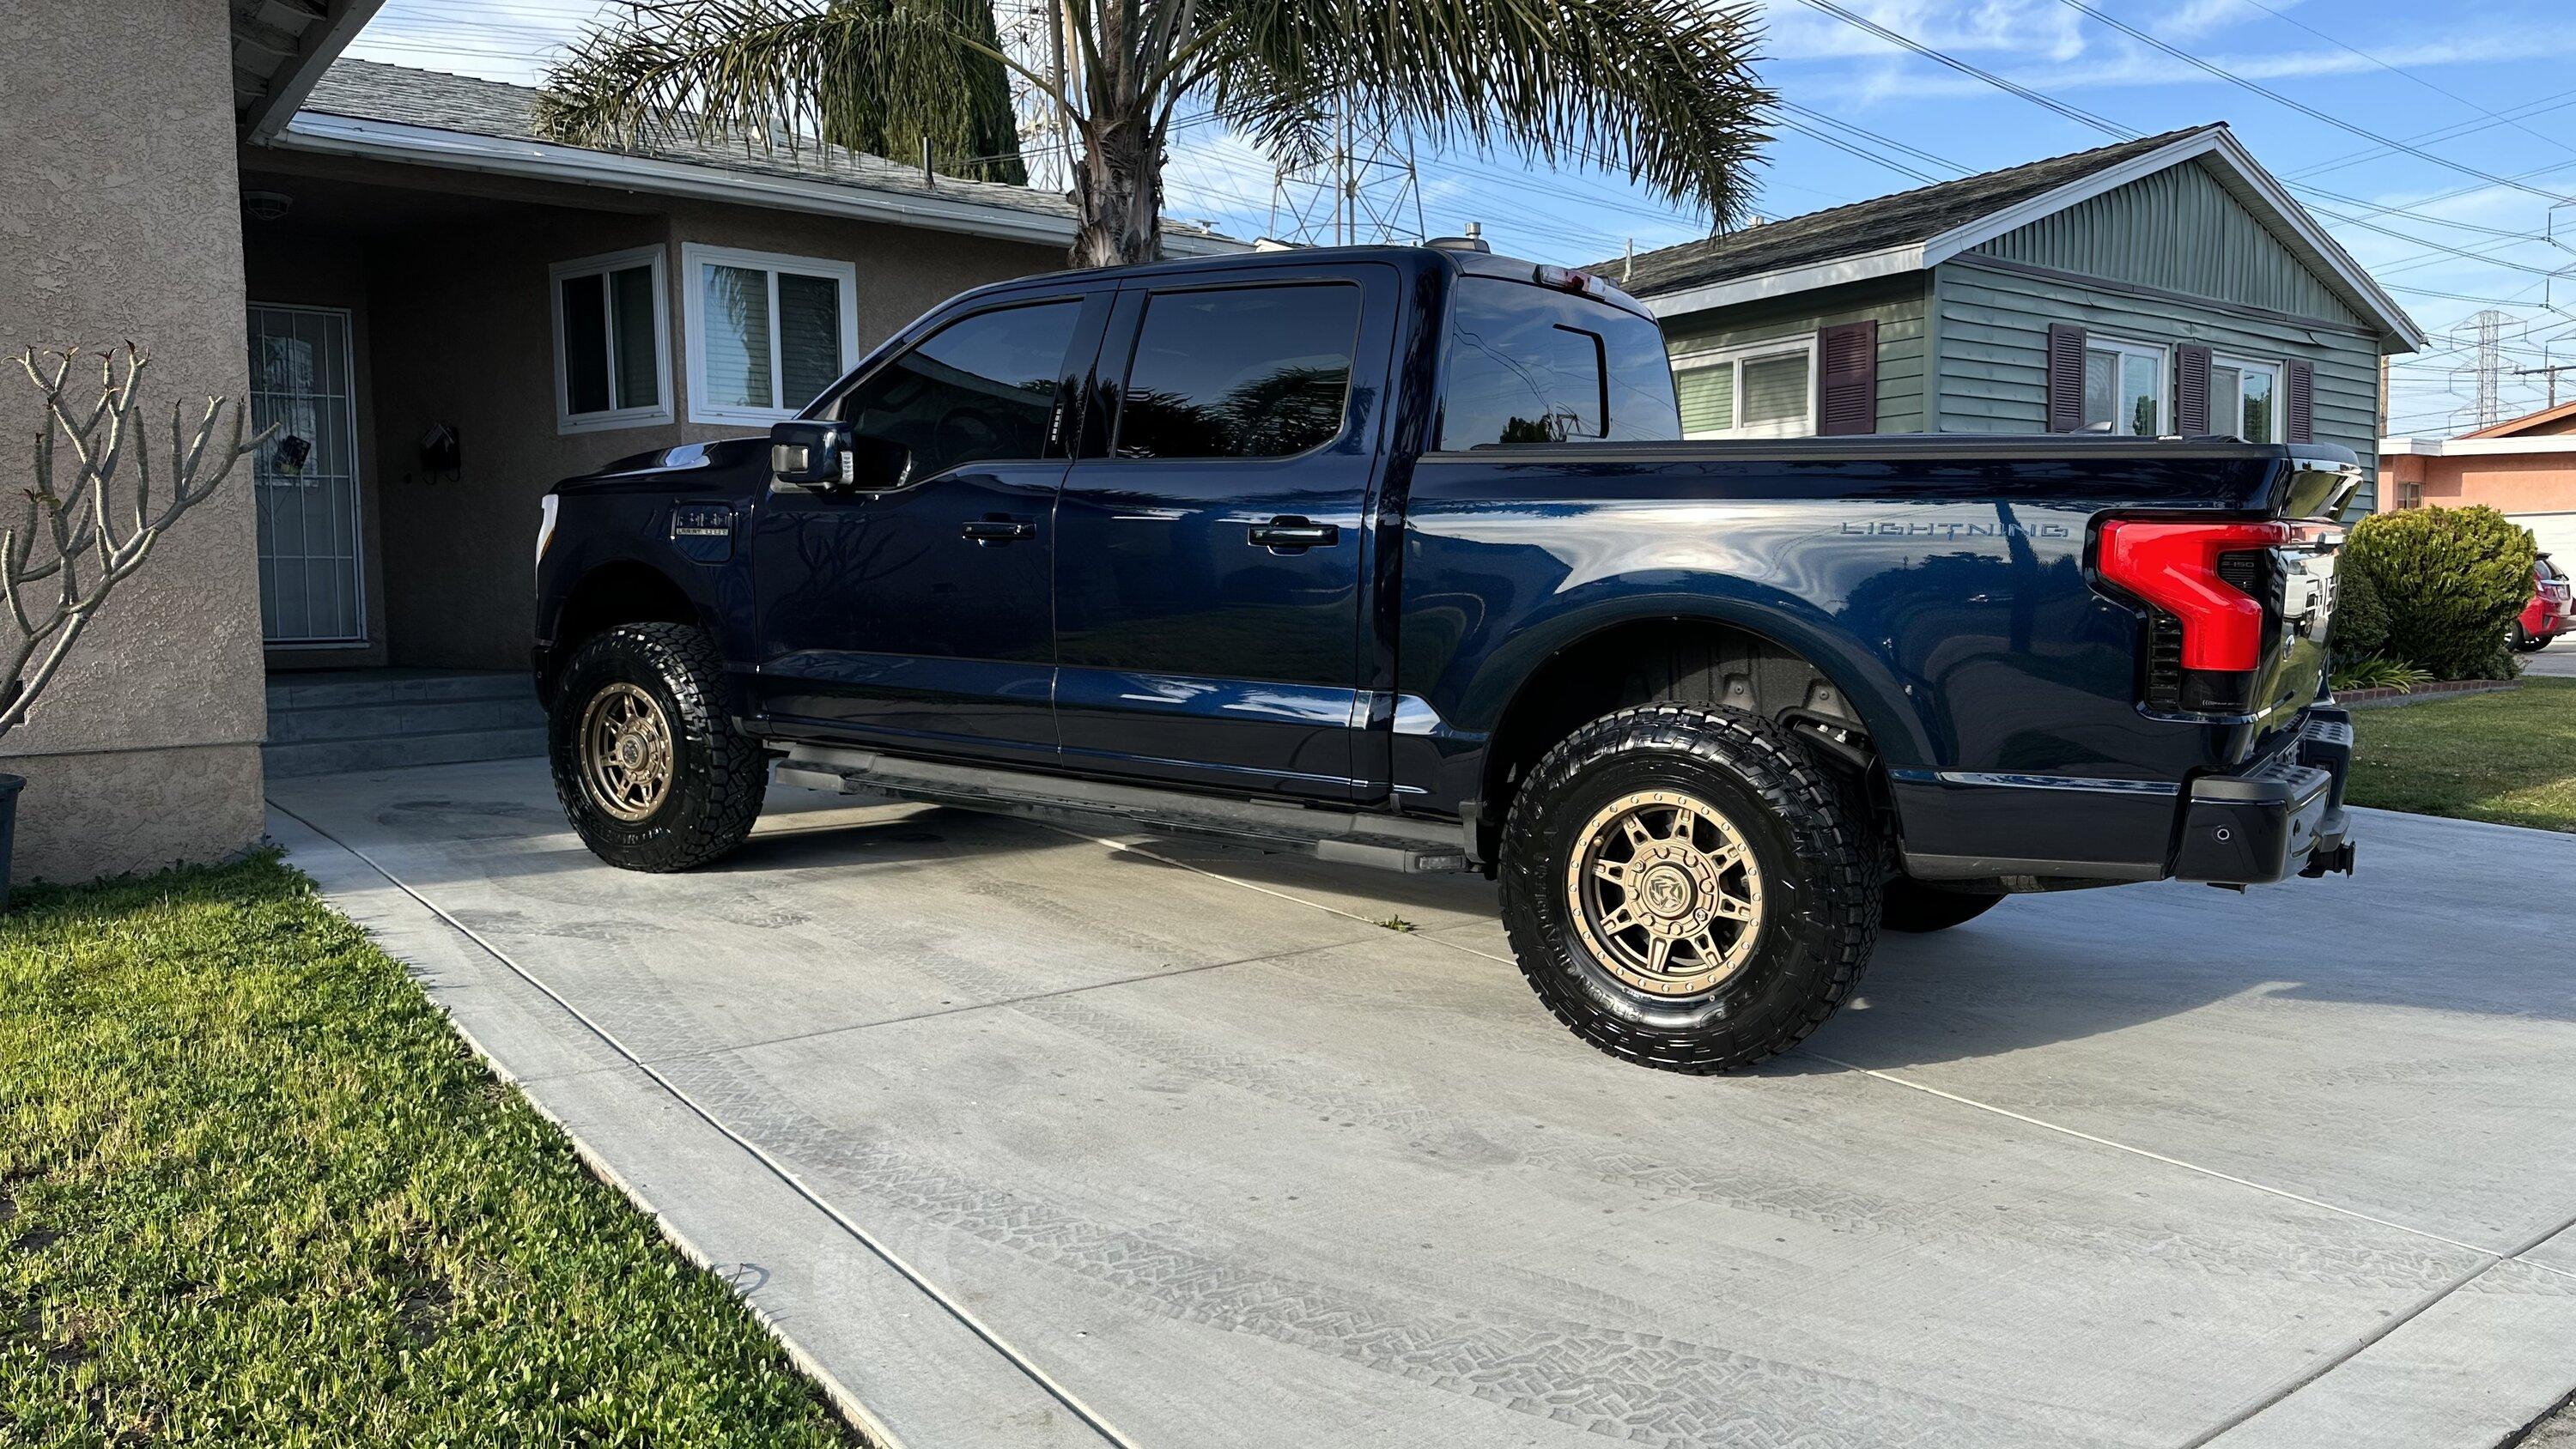 Ford F-150 Lightning Transformation is complete! 17" Method wheels installed + Stage3Motorsports leveling kit on Star White Lightning 0615726C-E33A-40E9-BC3D-CF6BC61BC0CB